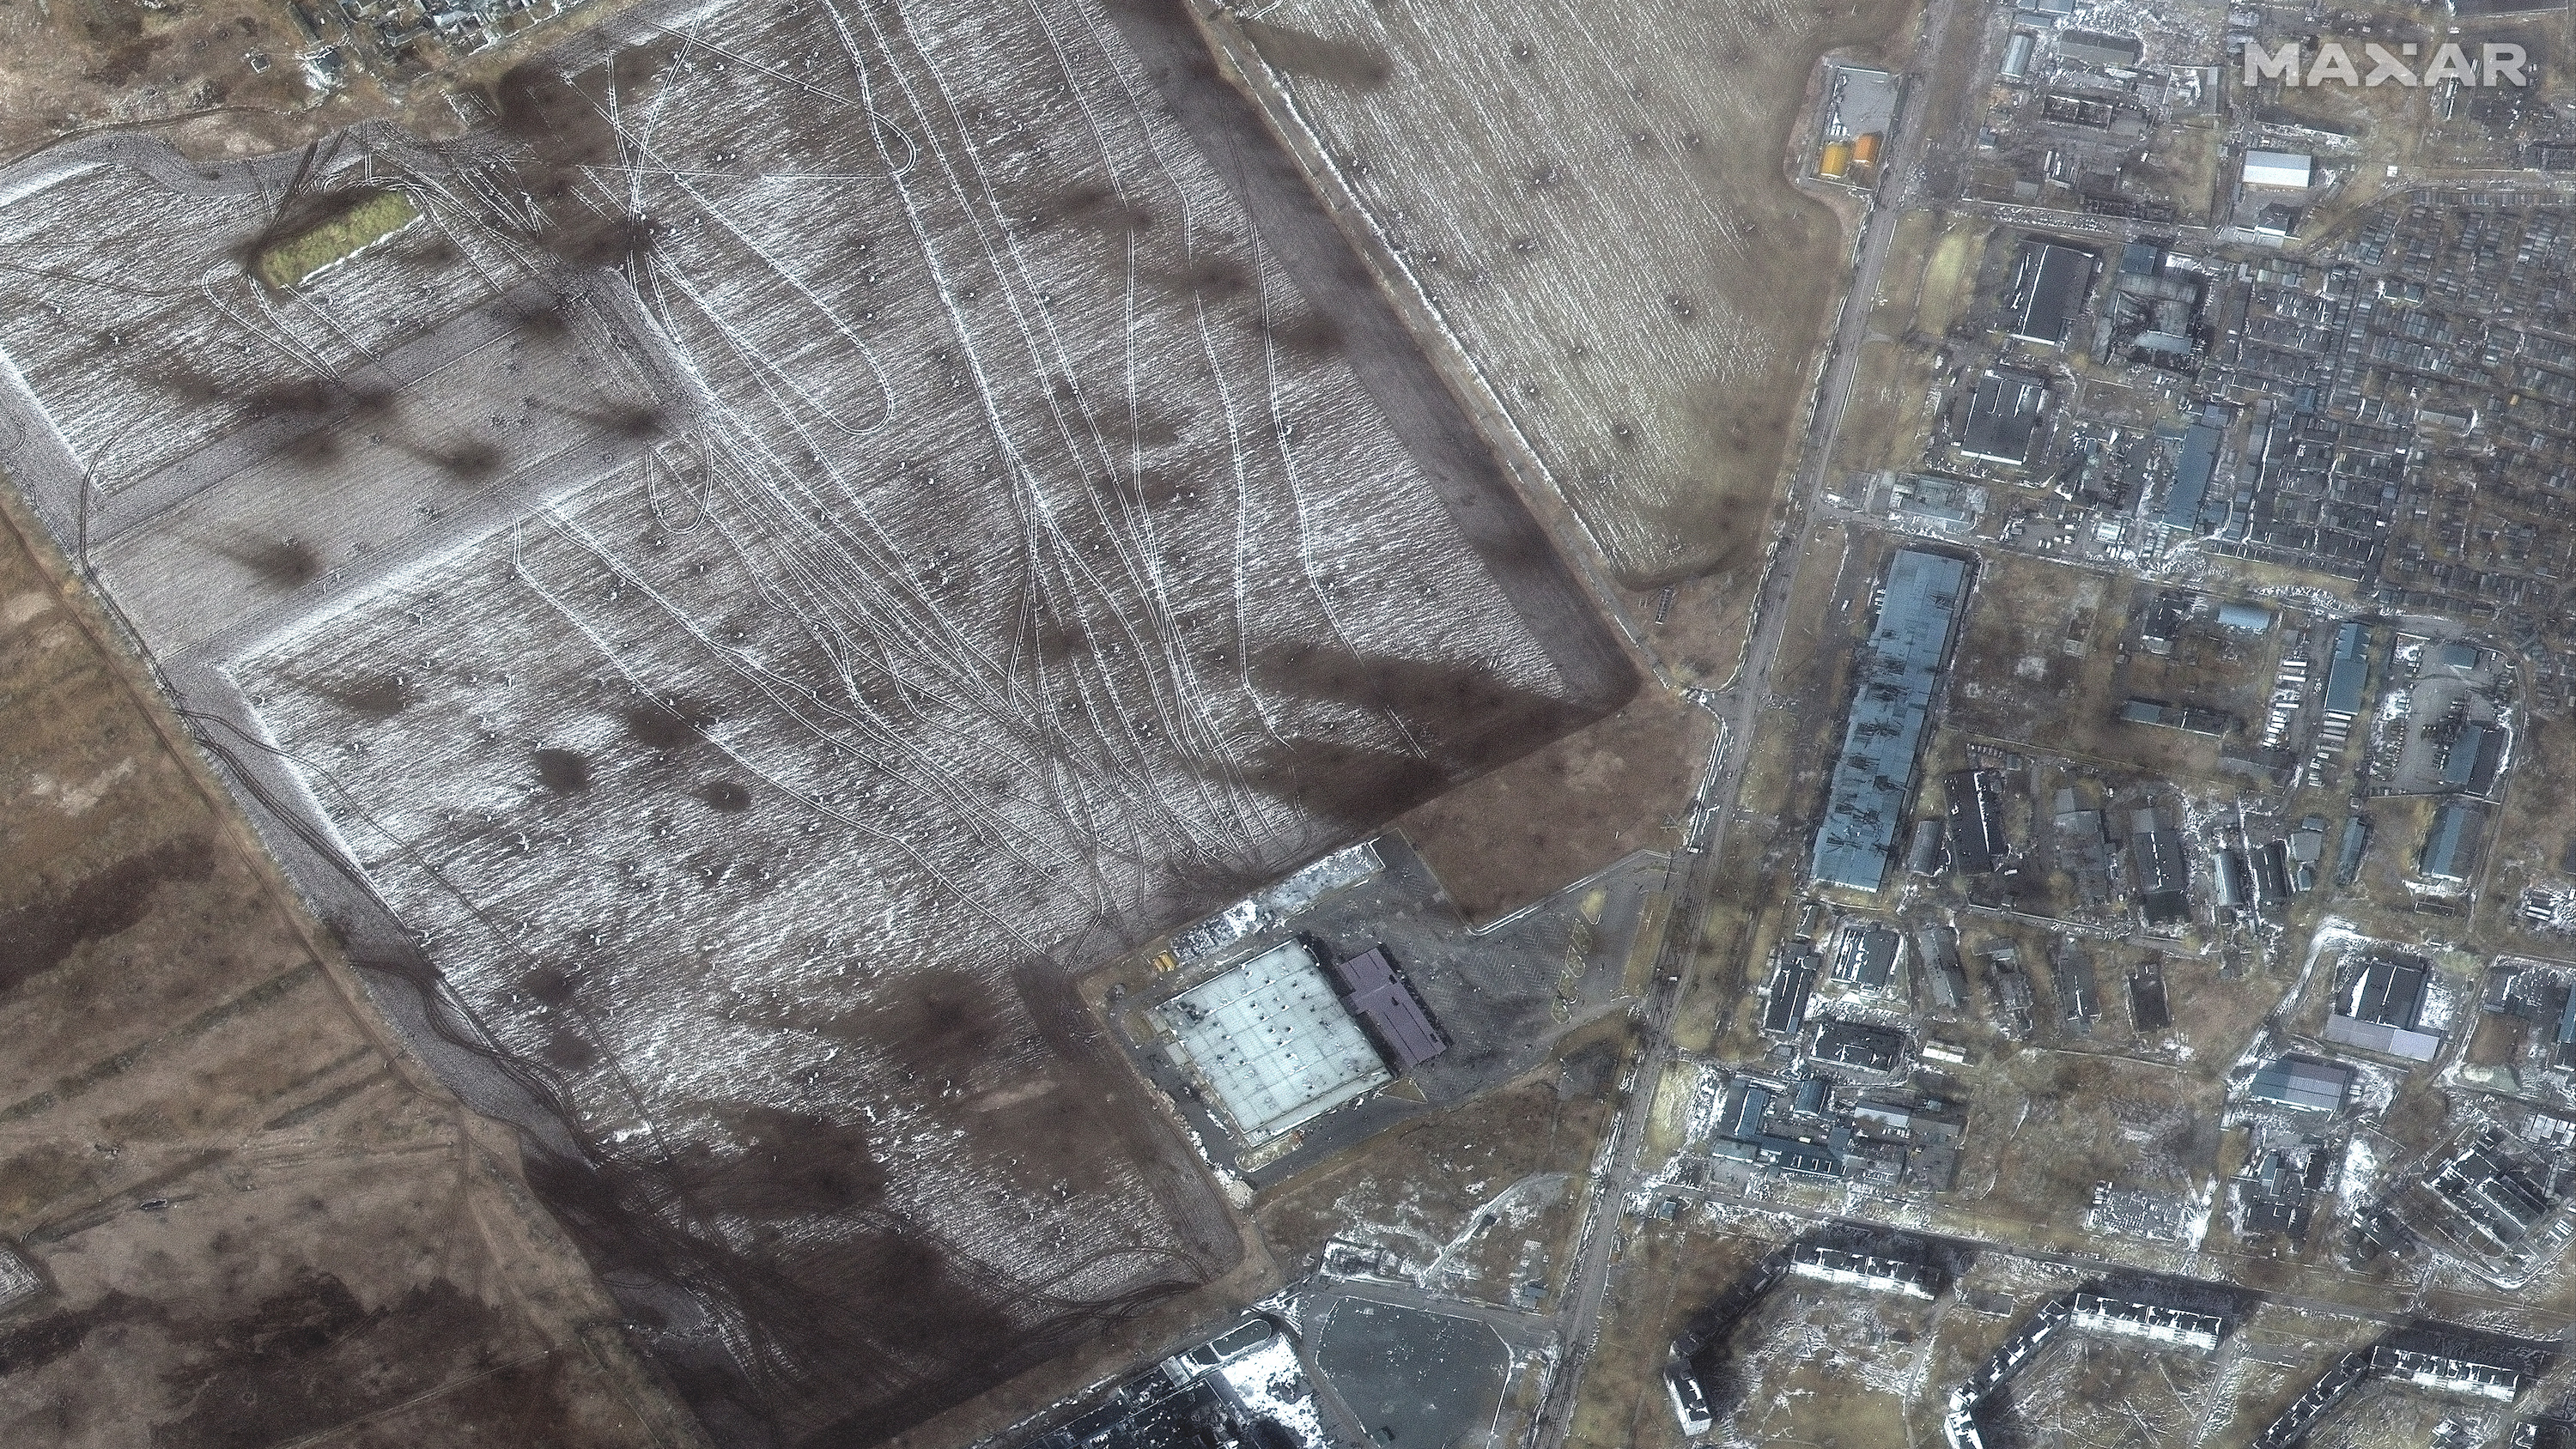 A cratered field, traced with trackmarks, is pictured next to destroyed buildings.